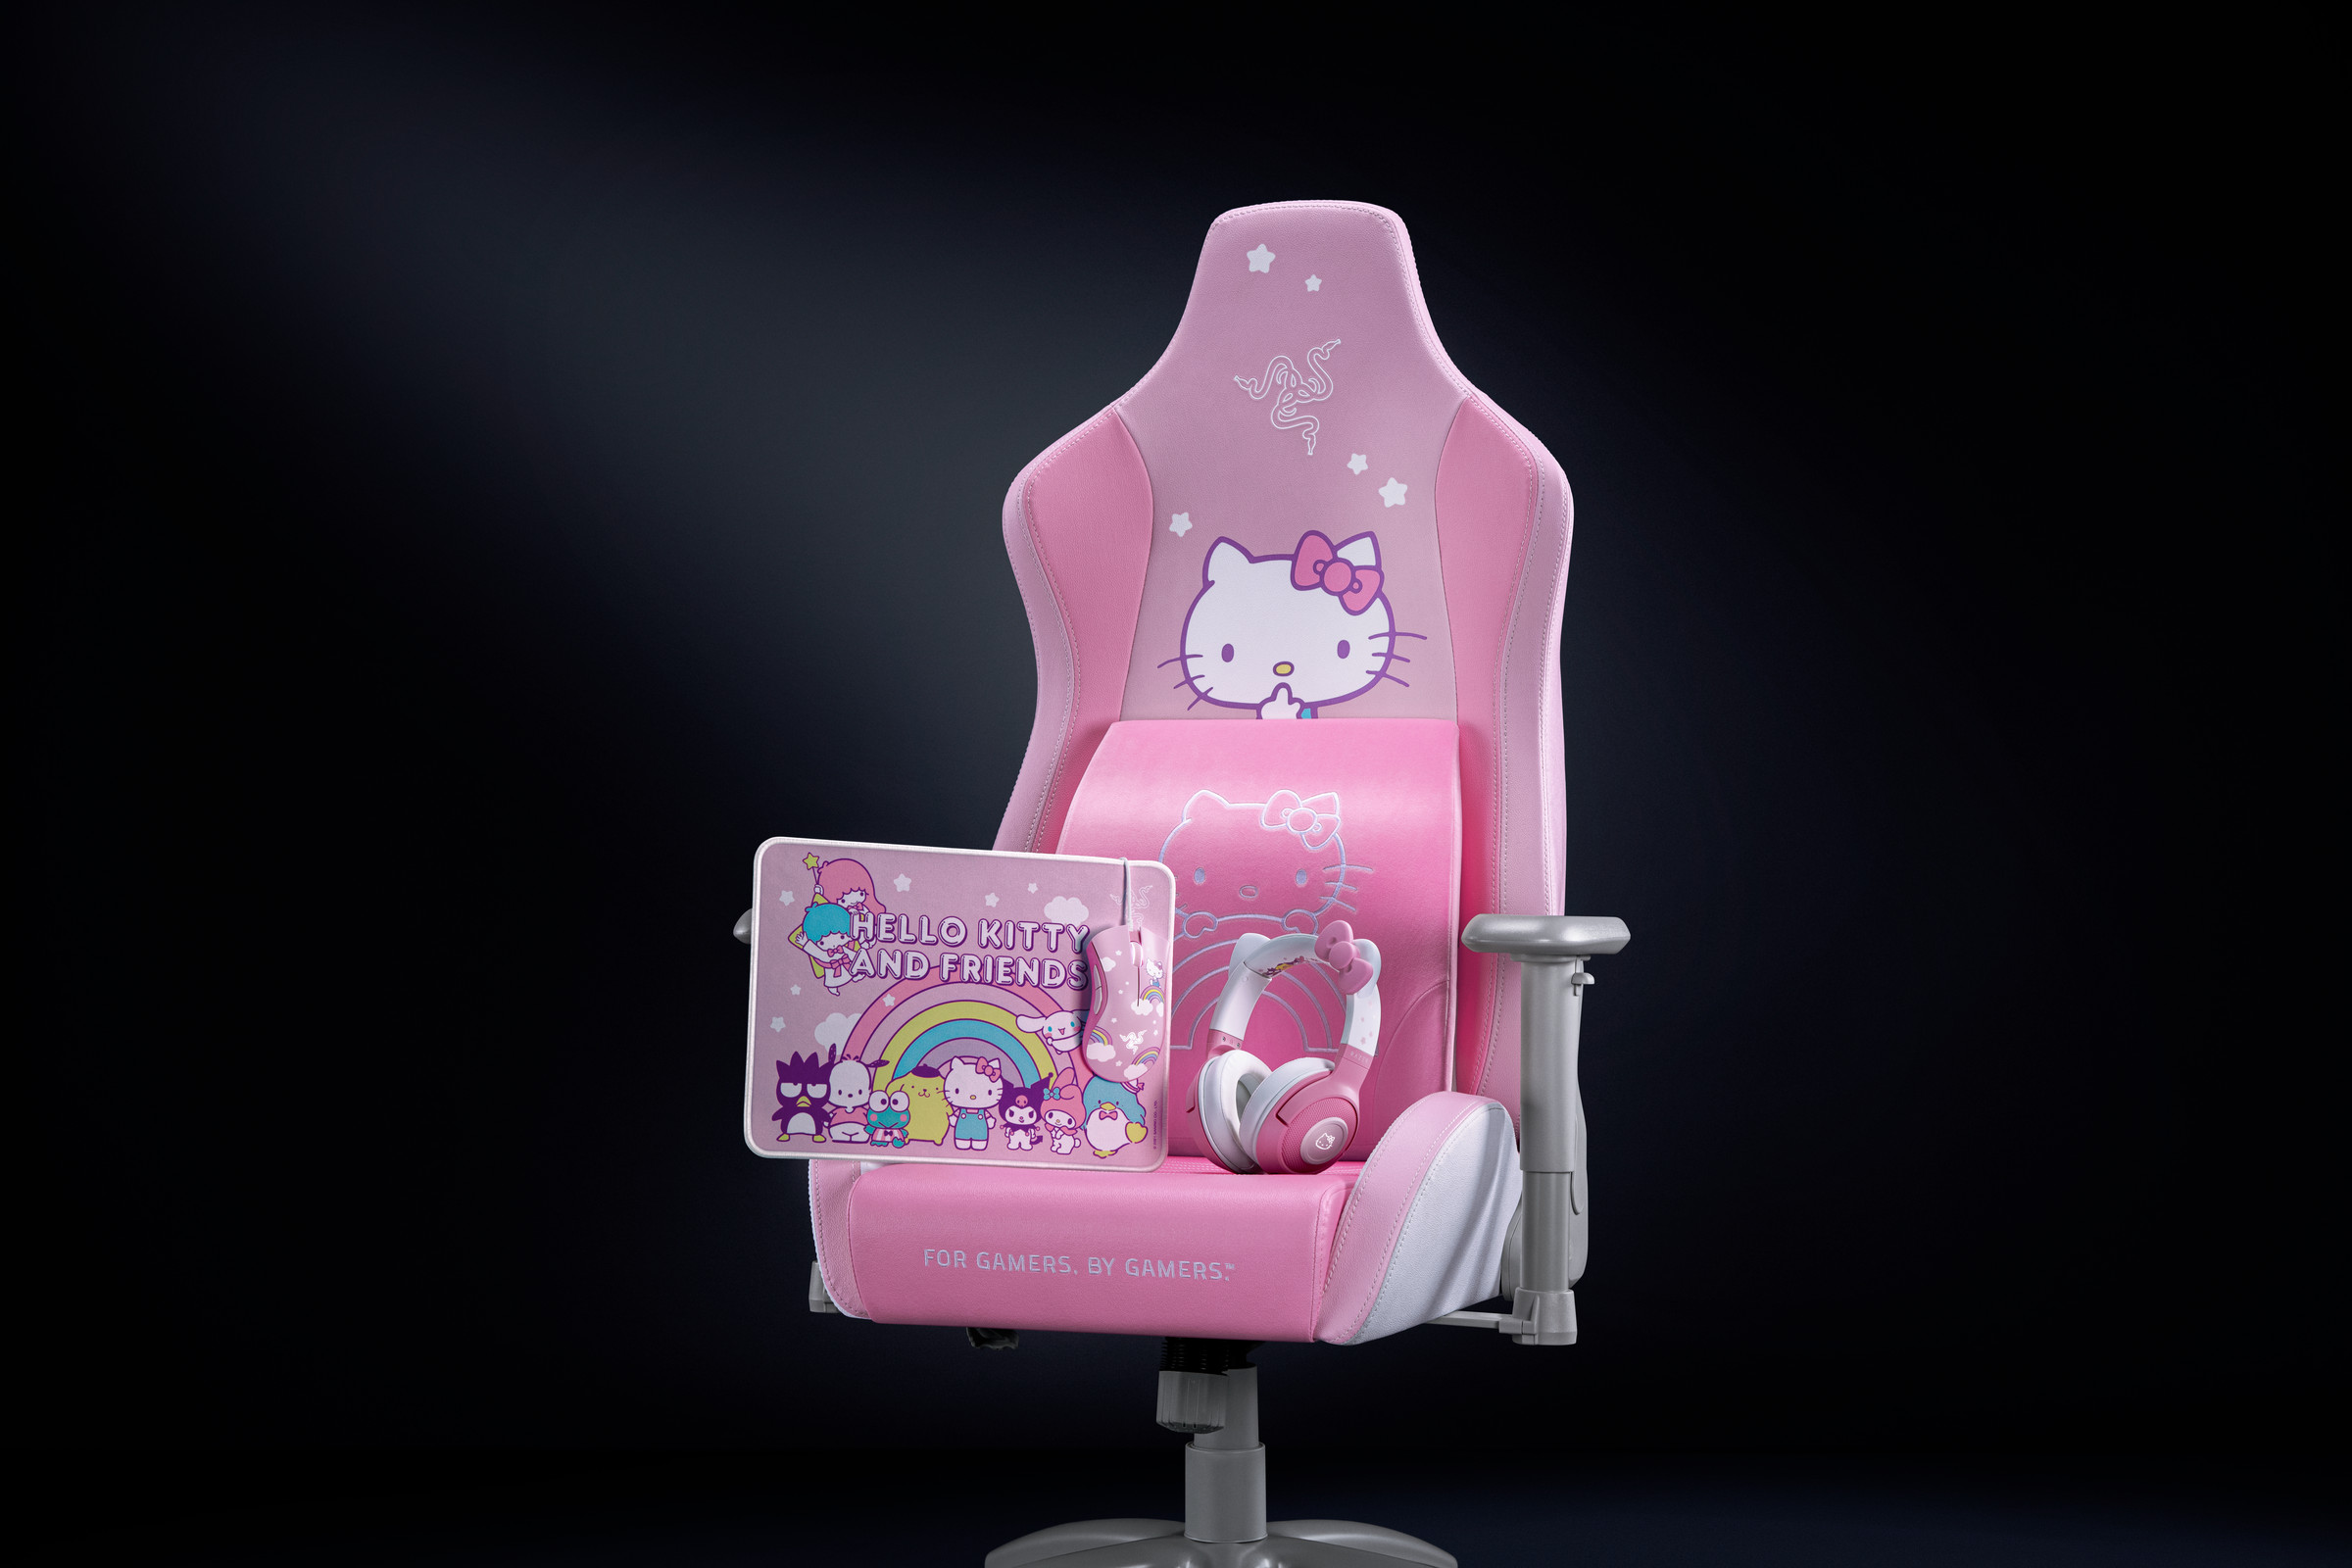 Razer’s Hello Kitty chair in front of a black background. On the chair are the Hello Kitty lumbar cushion, headset, mousepad and mouse.